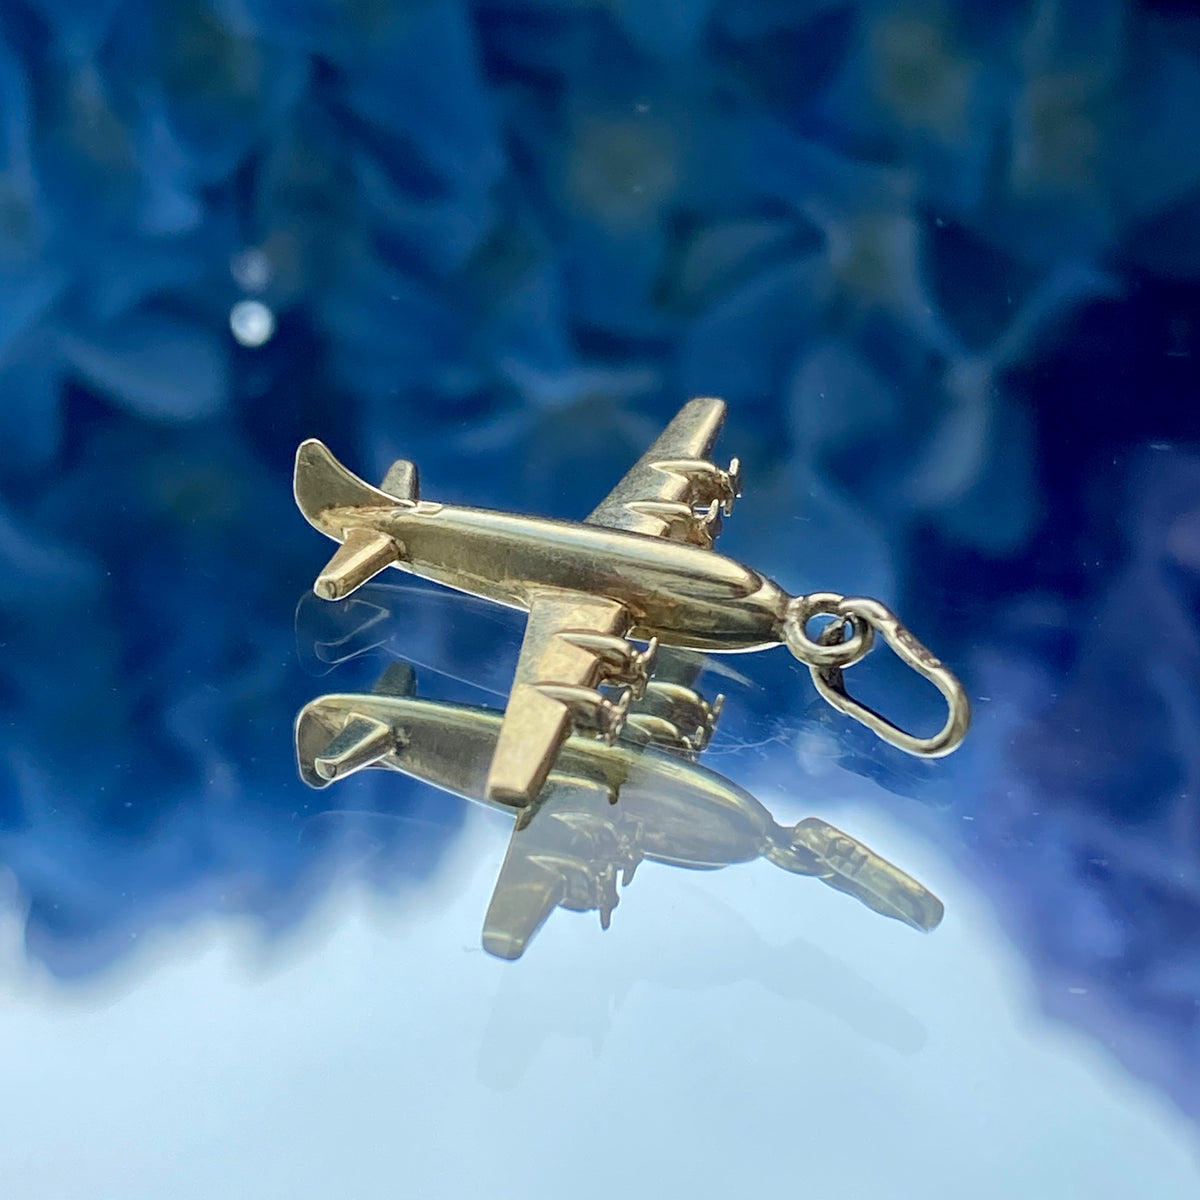 Vintage Airplane Charm Pendant sold by Doyle and Doyle an antique and vintage jewelry boutique.